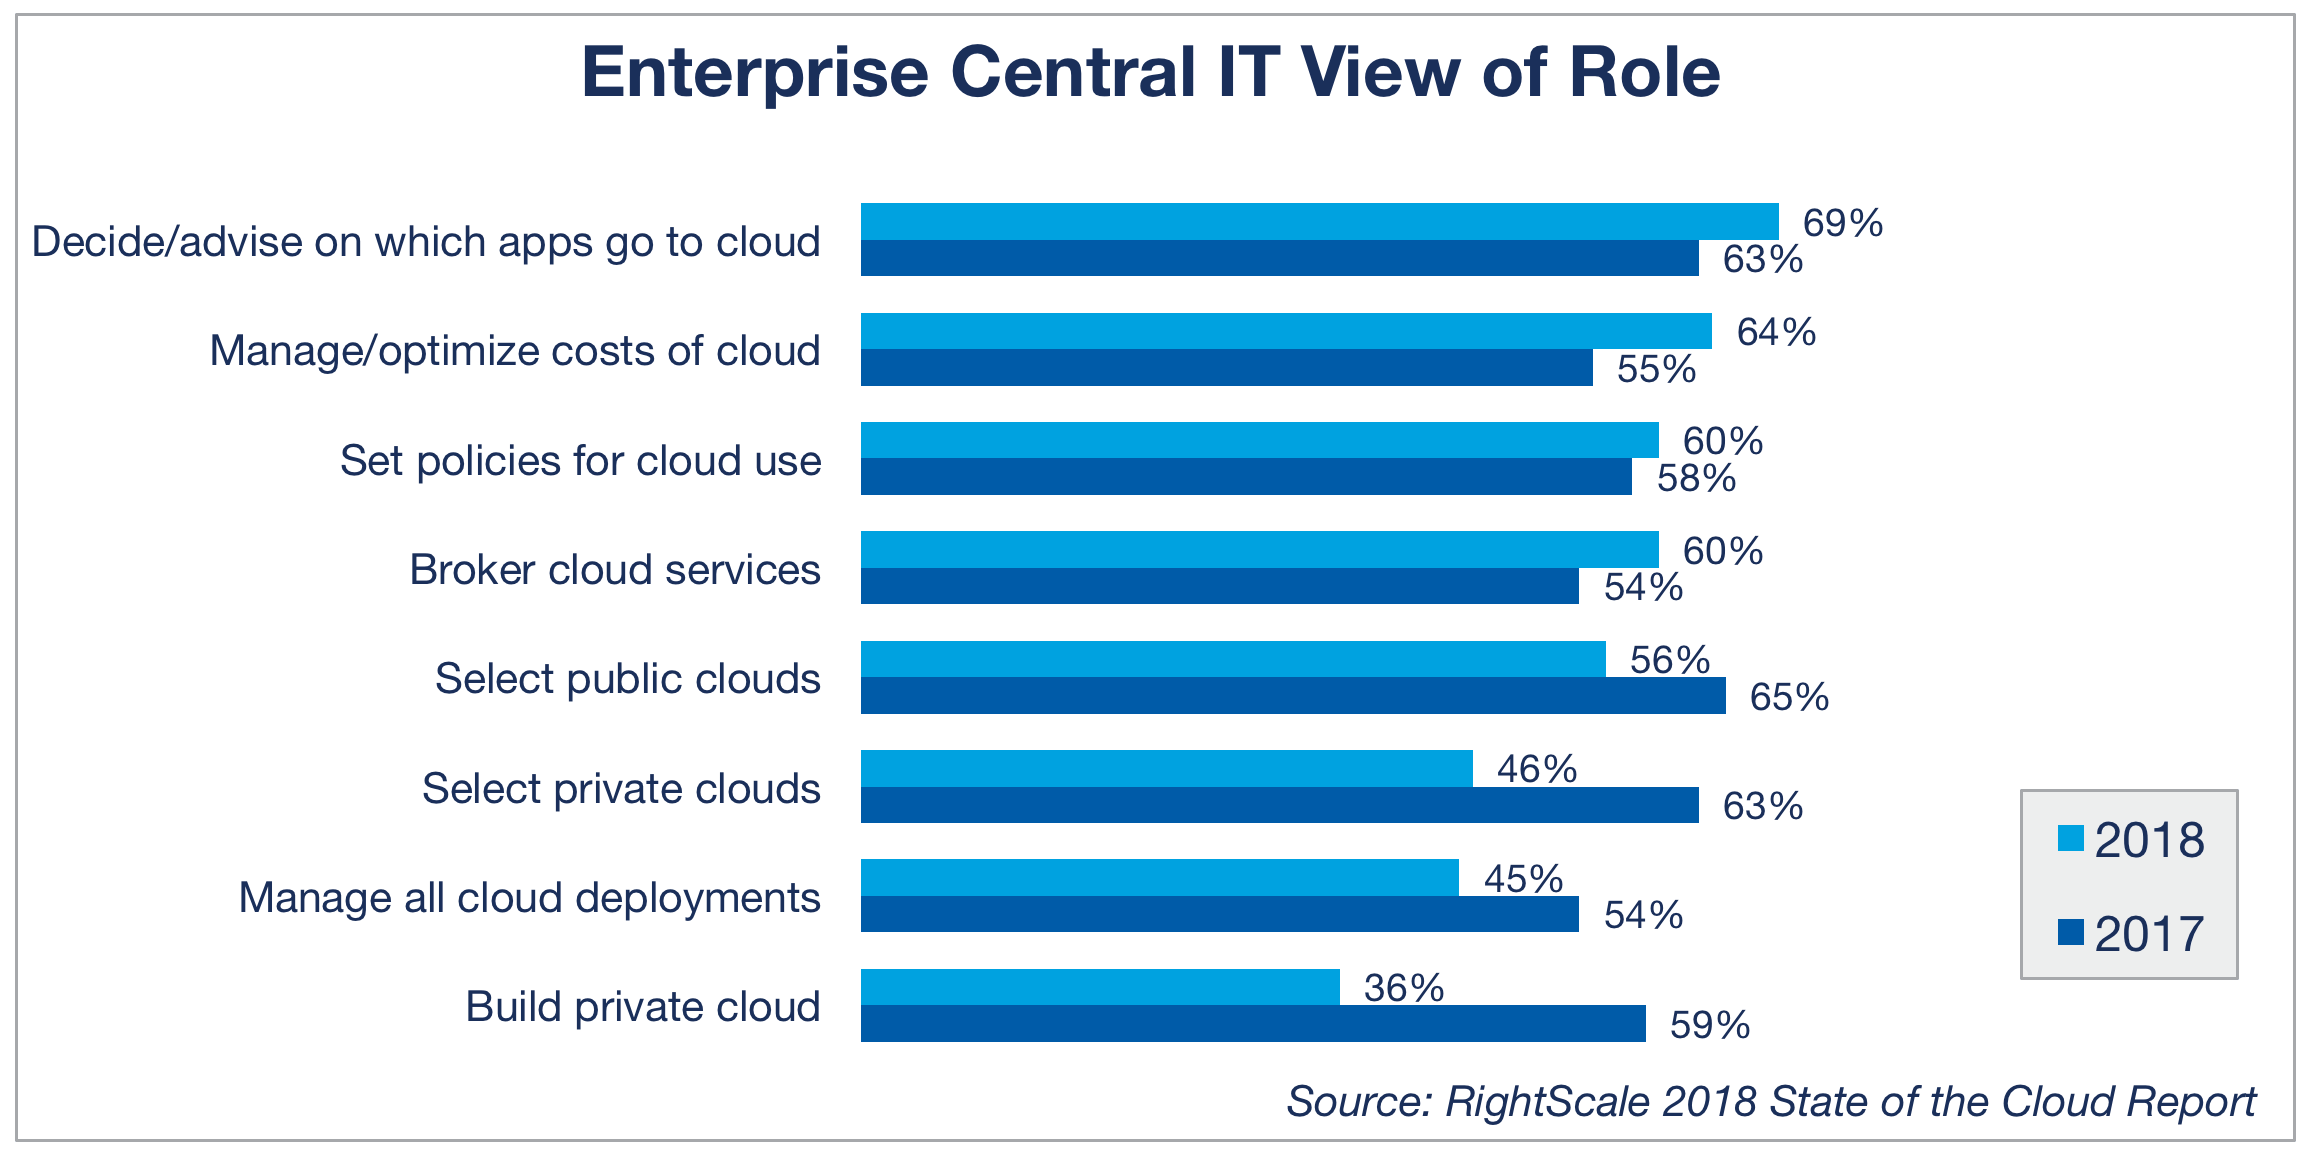 RightScale-Cloud-Computing-Trends-Enterprise-Central-IT-View-of-Role